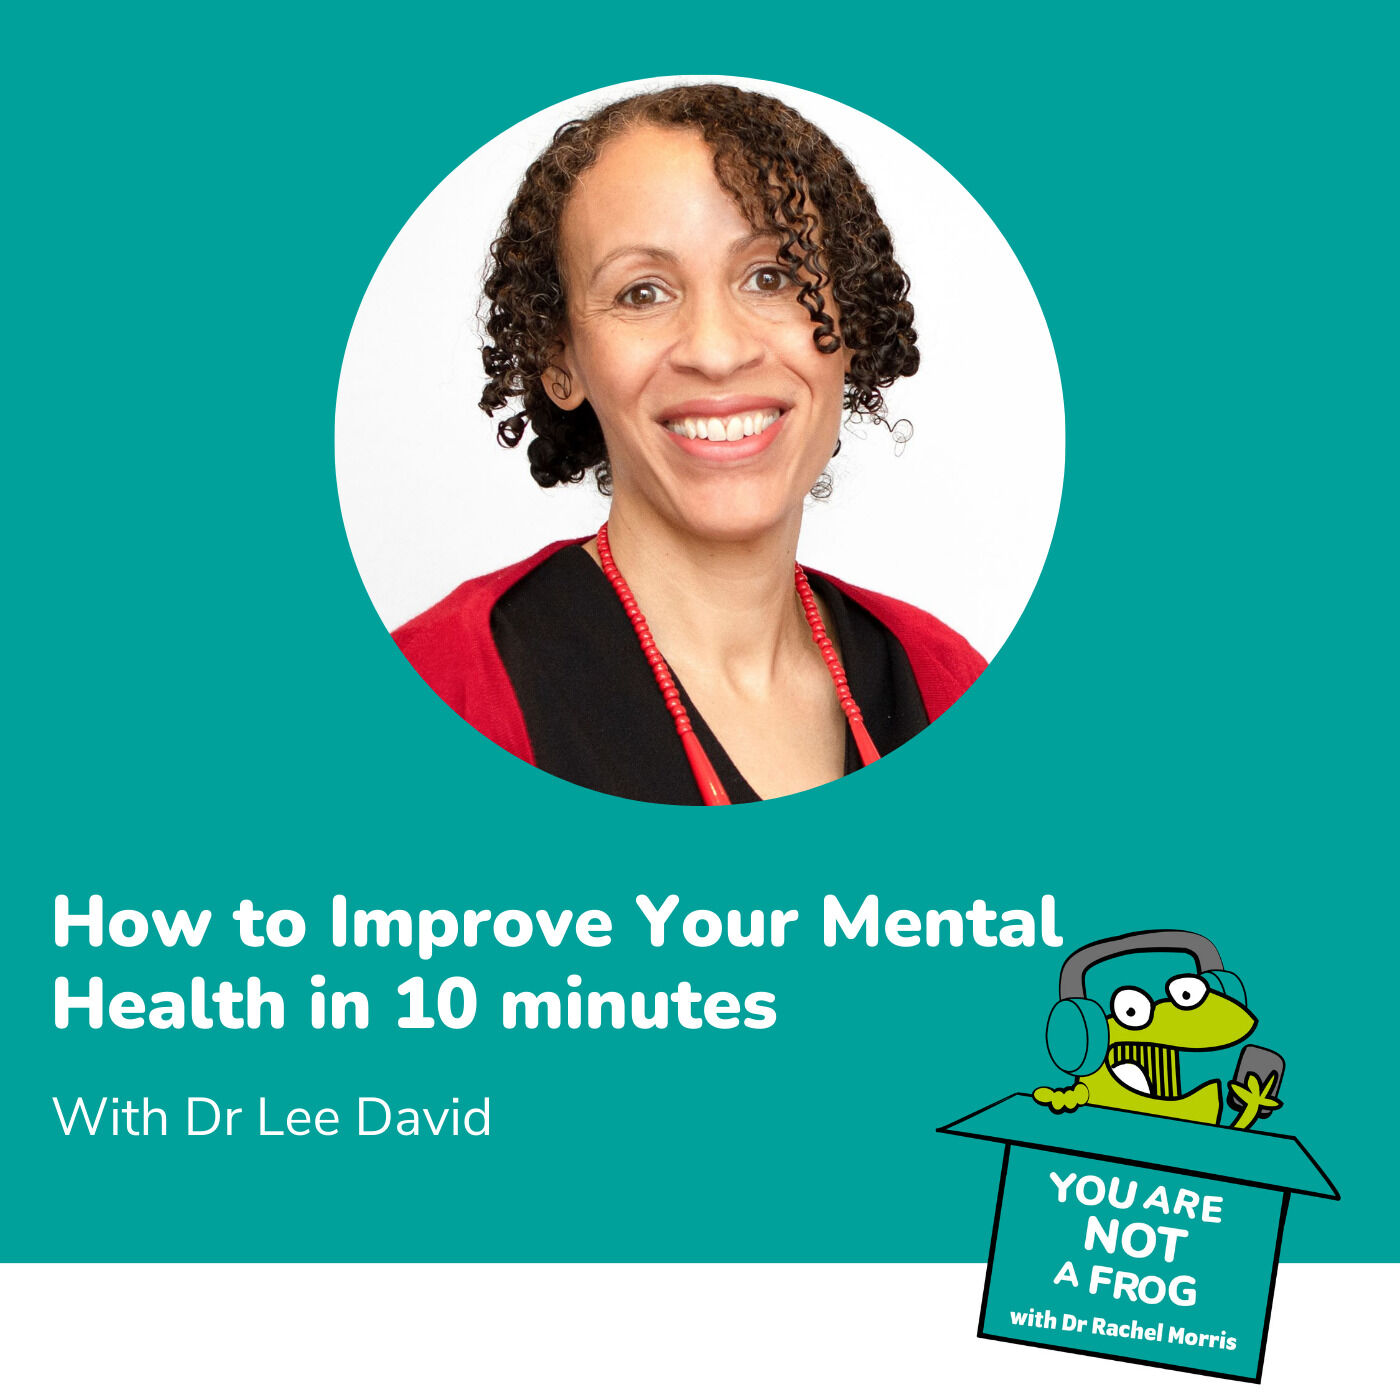 How to Improve Your Mental Health in 10 Minutes with Dr Lee David